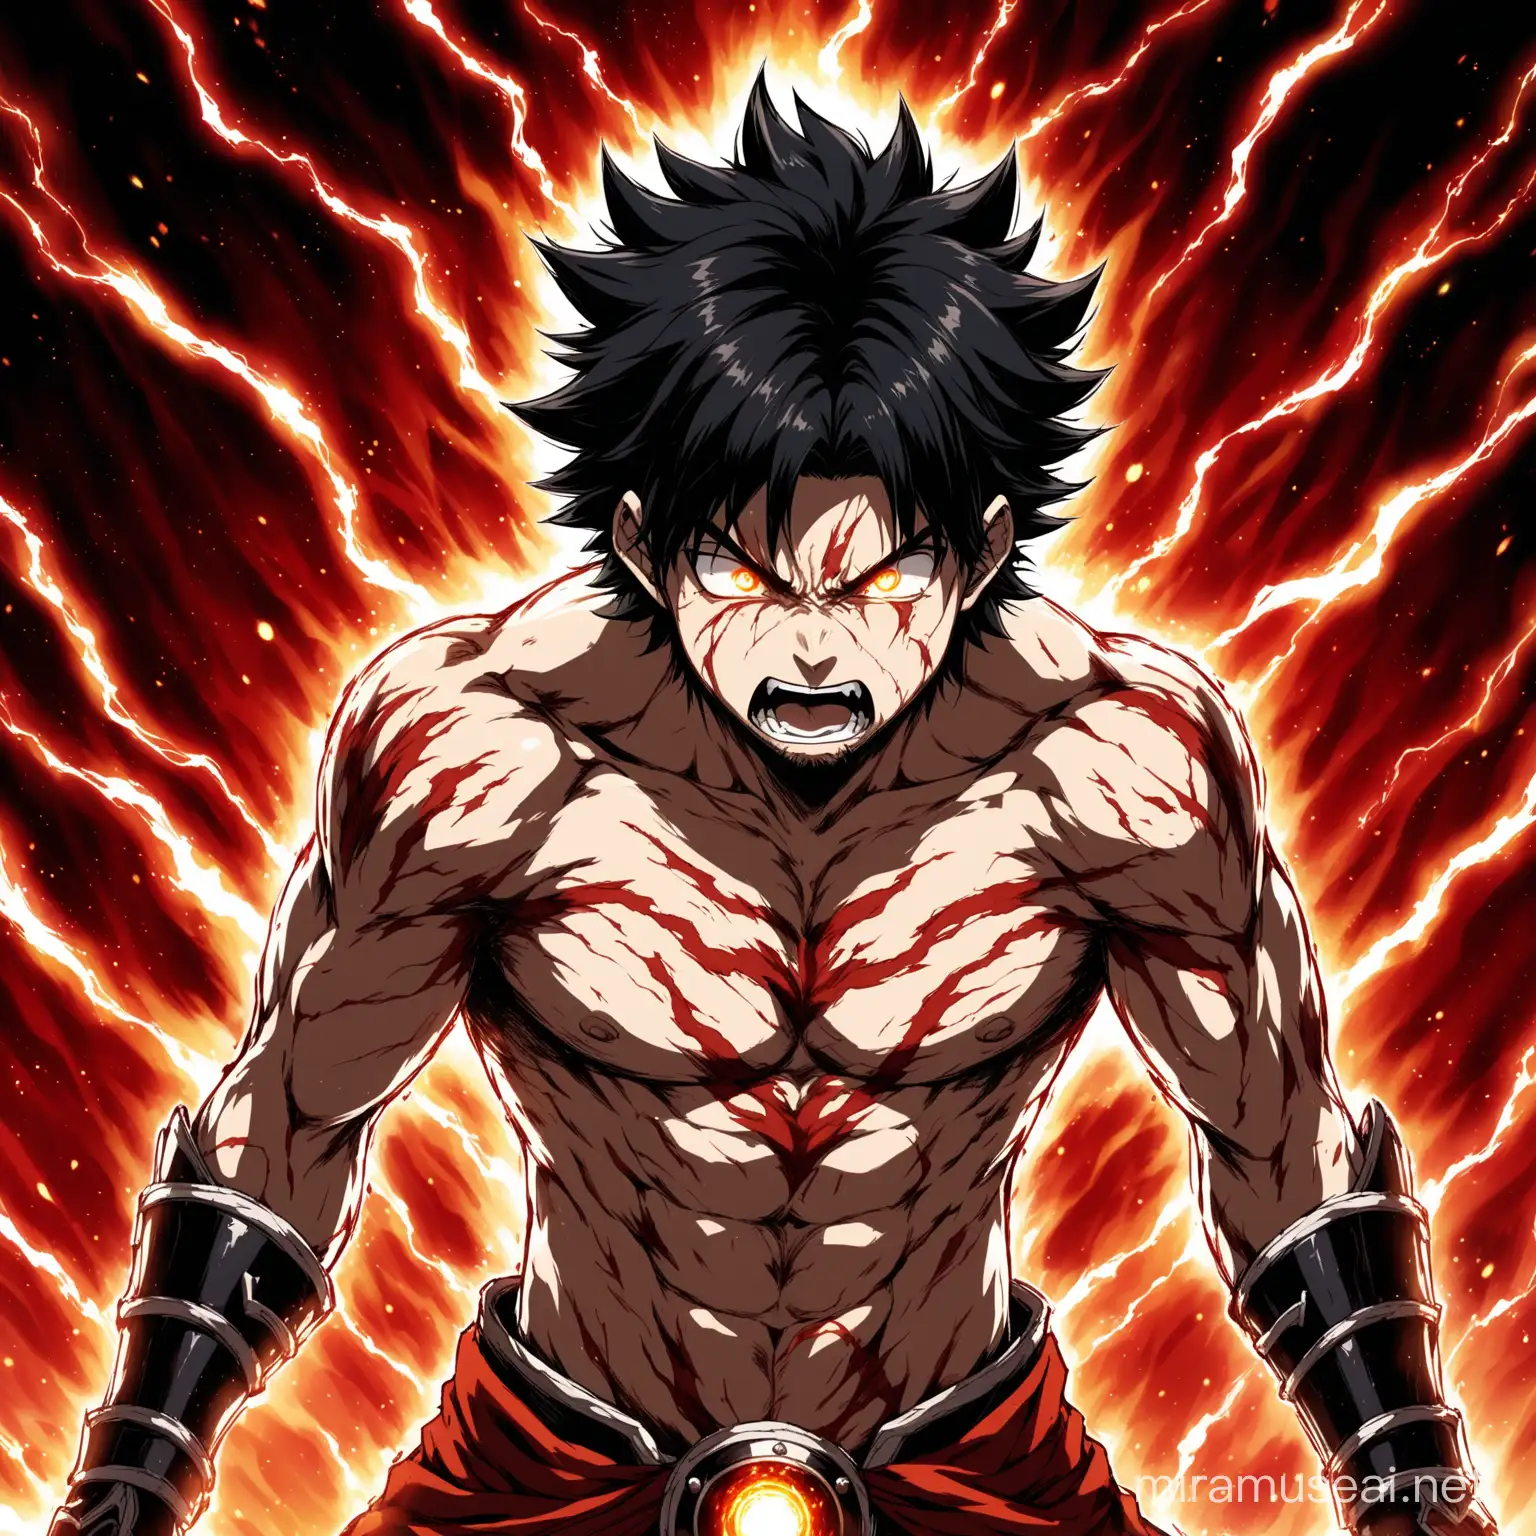 ruined background, energy aura, man, scarred body and face, fantasy anime style, rage filled expression, no pupils, flowing black hair, shirtless, red and white lower armour